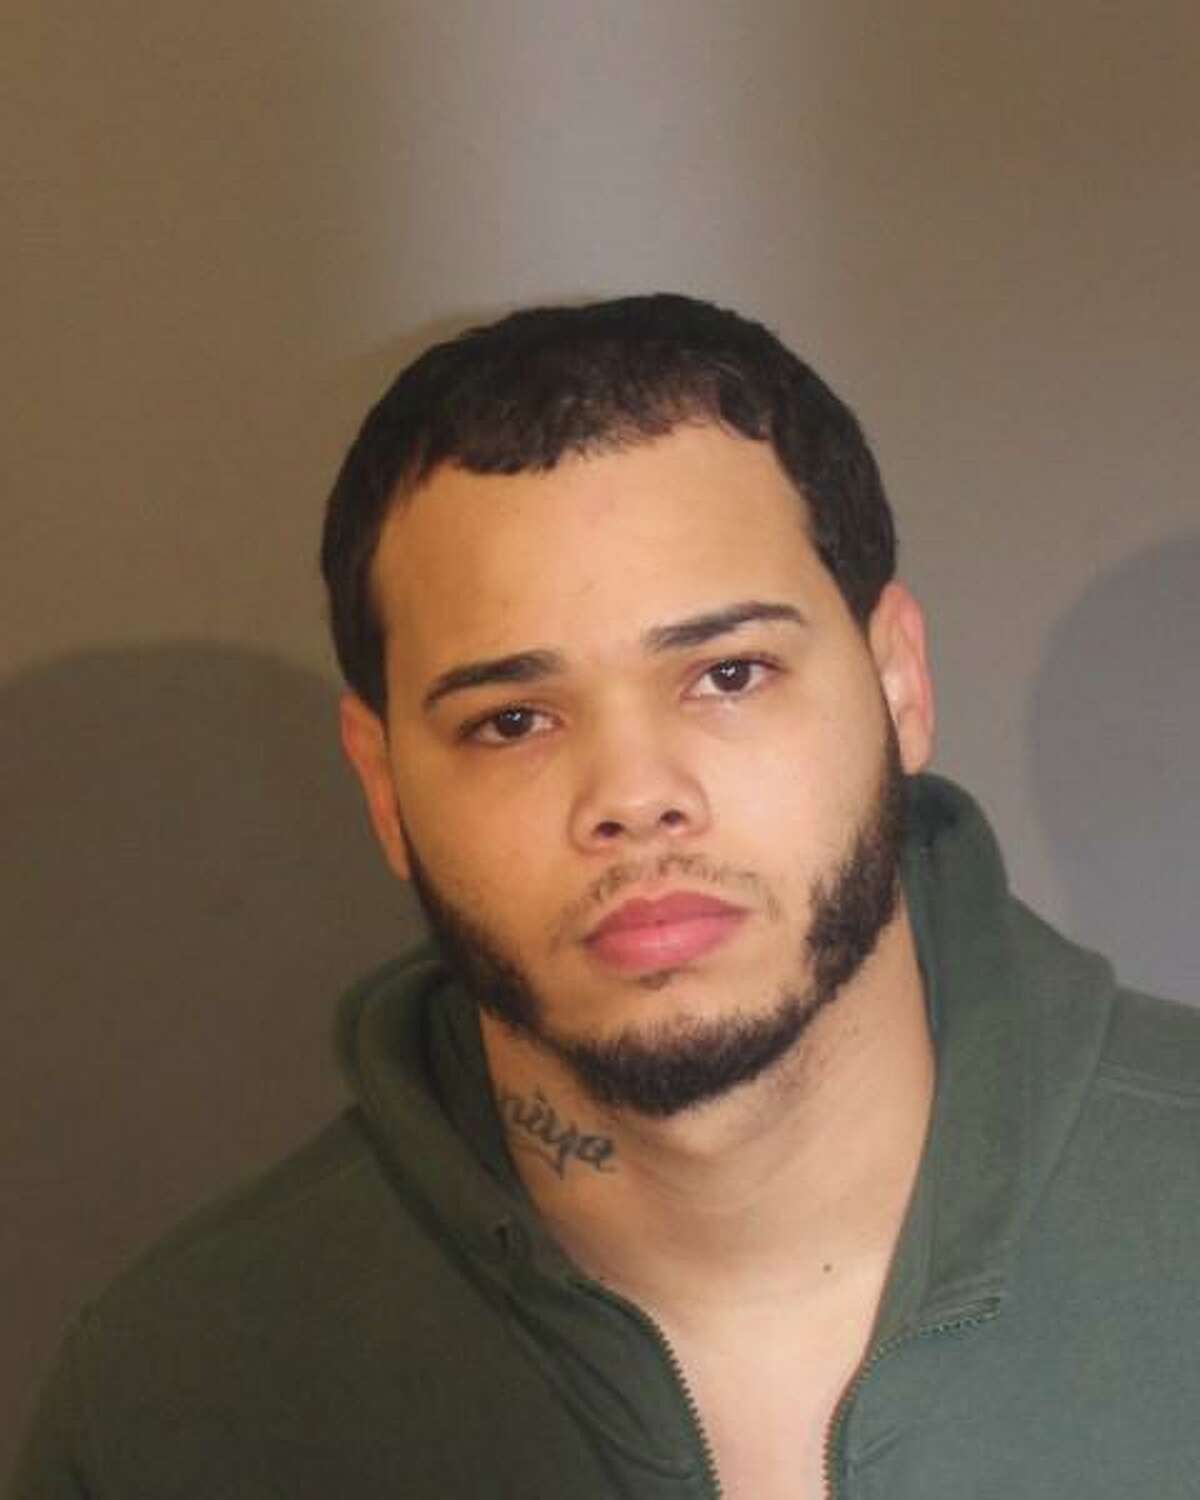 Andrew Fermin was sentenced Wednesday on charges stemming from the January 2020 shooting at Castello Restaurant in Danbury, Conn.